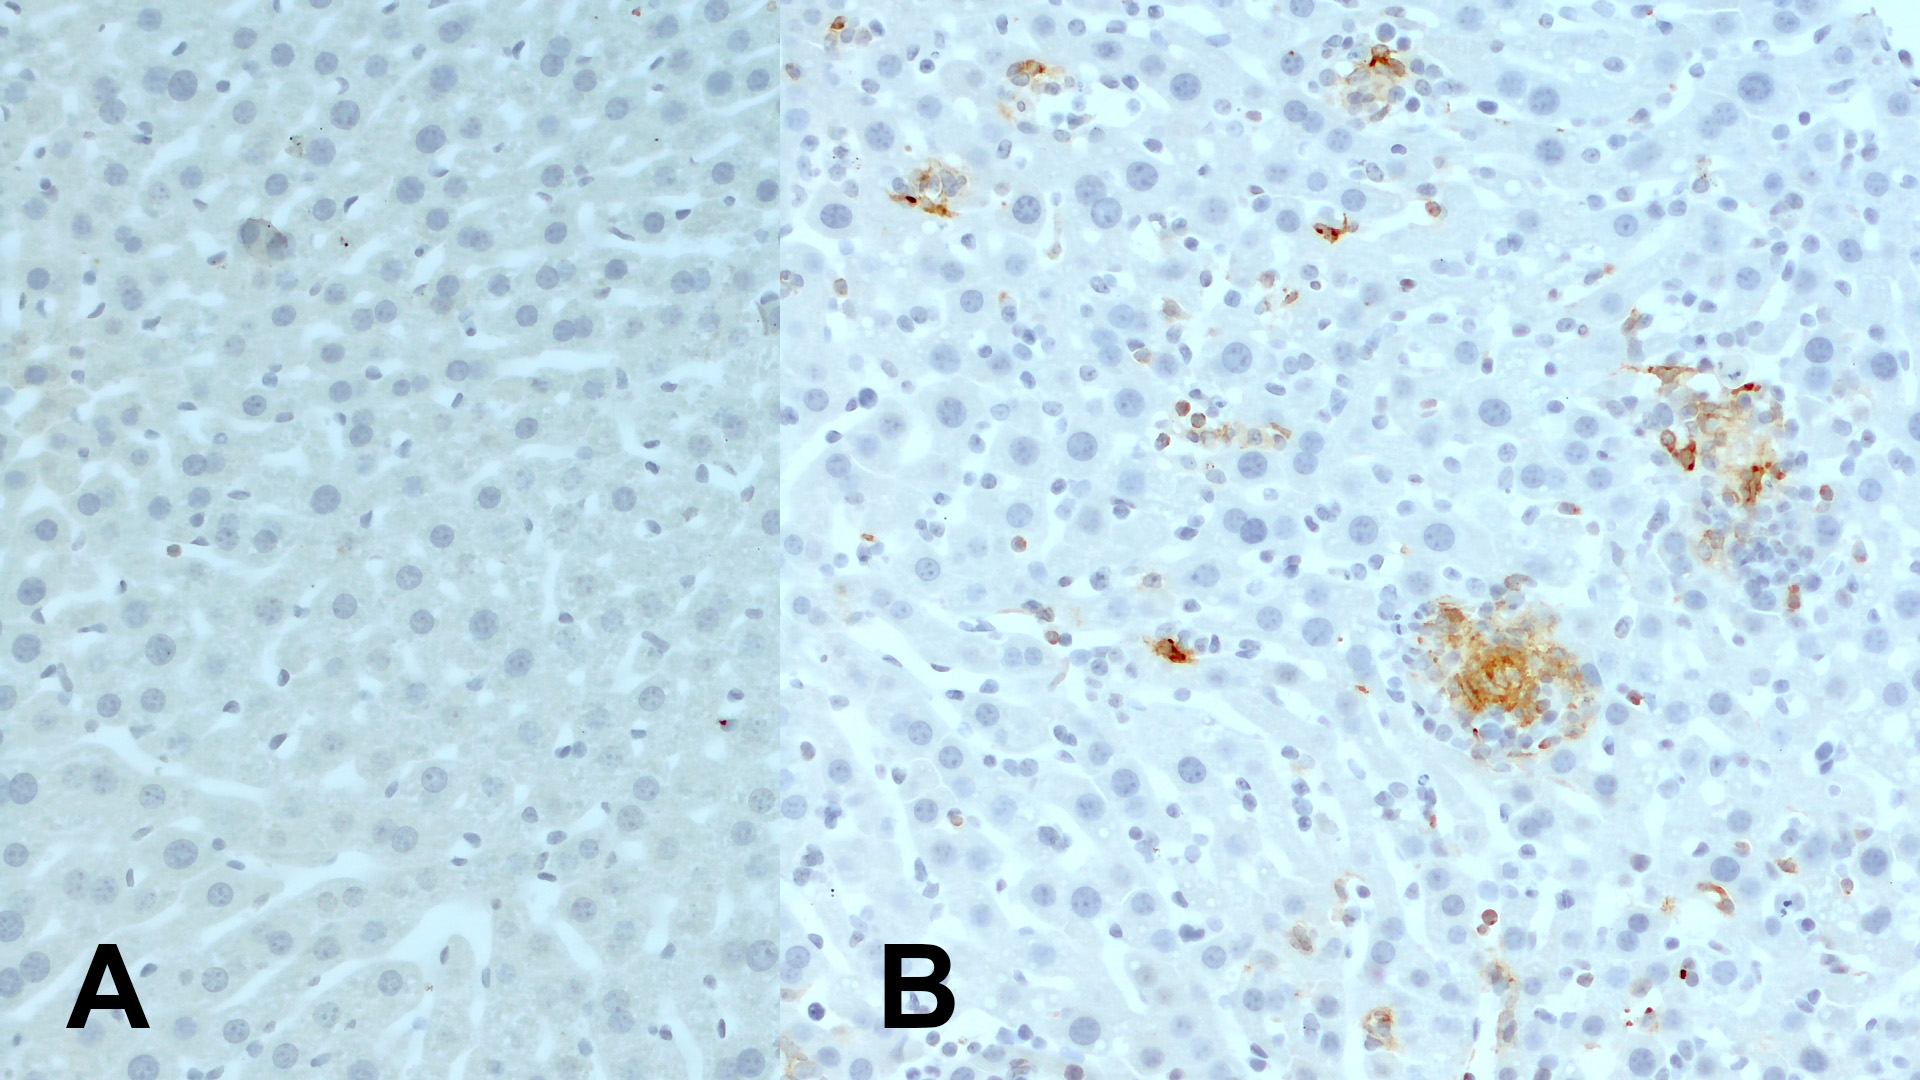 Immunohistochemical staining of FFPE mouse liver sections of A a naïve control mouse and B a mouse with systemic T. gondii infection using rabbit anti-CD11c